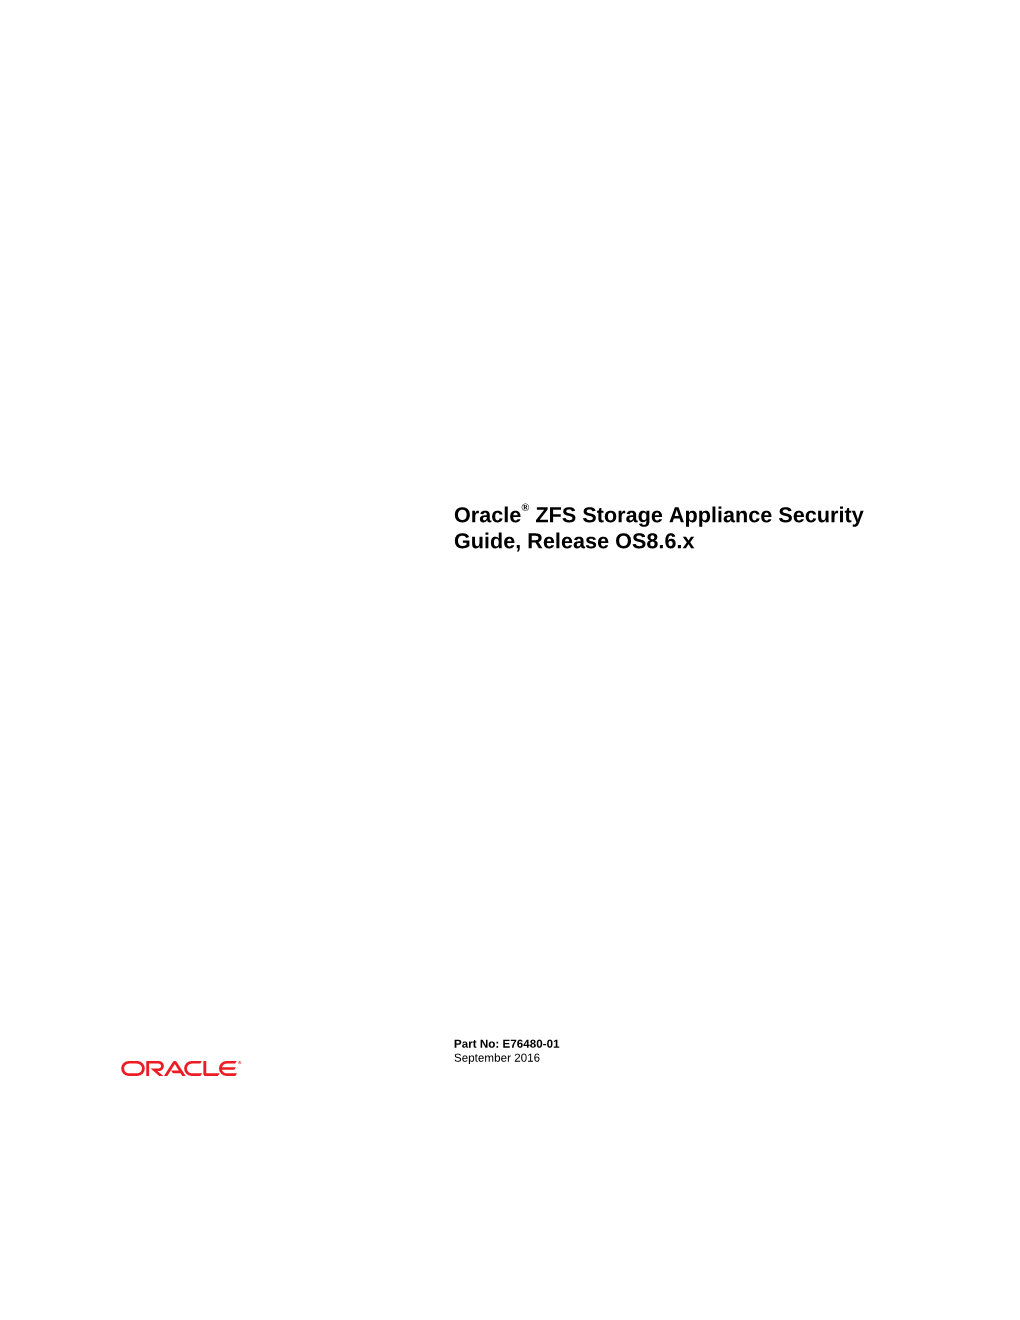 Oracle® ZFS Storage Appliance Security Guide, Release OS8.6.X